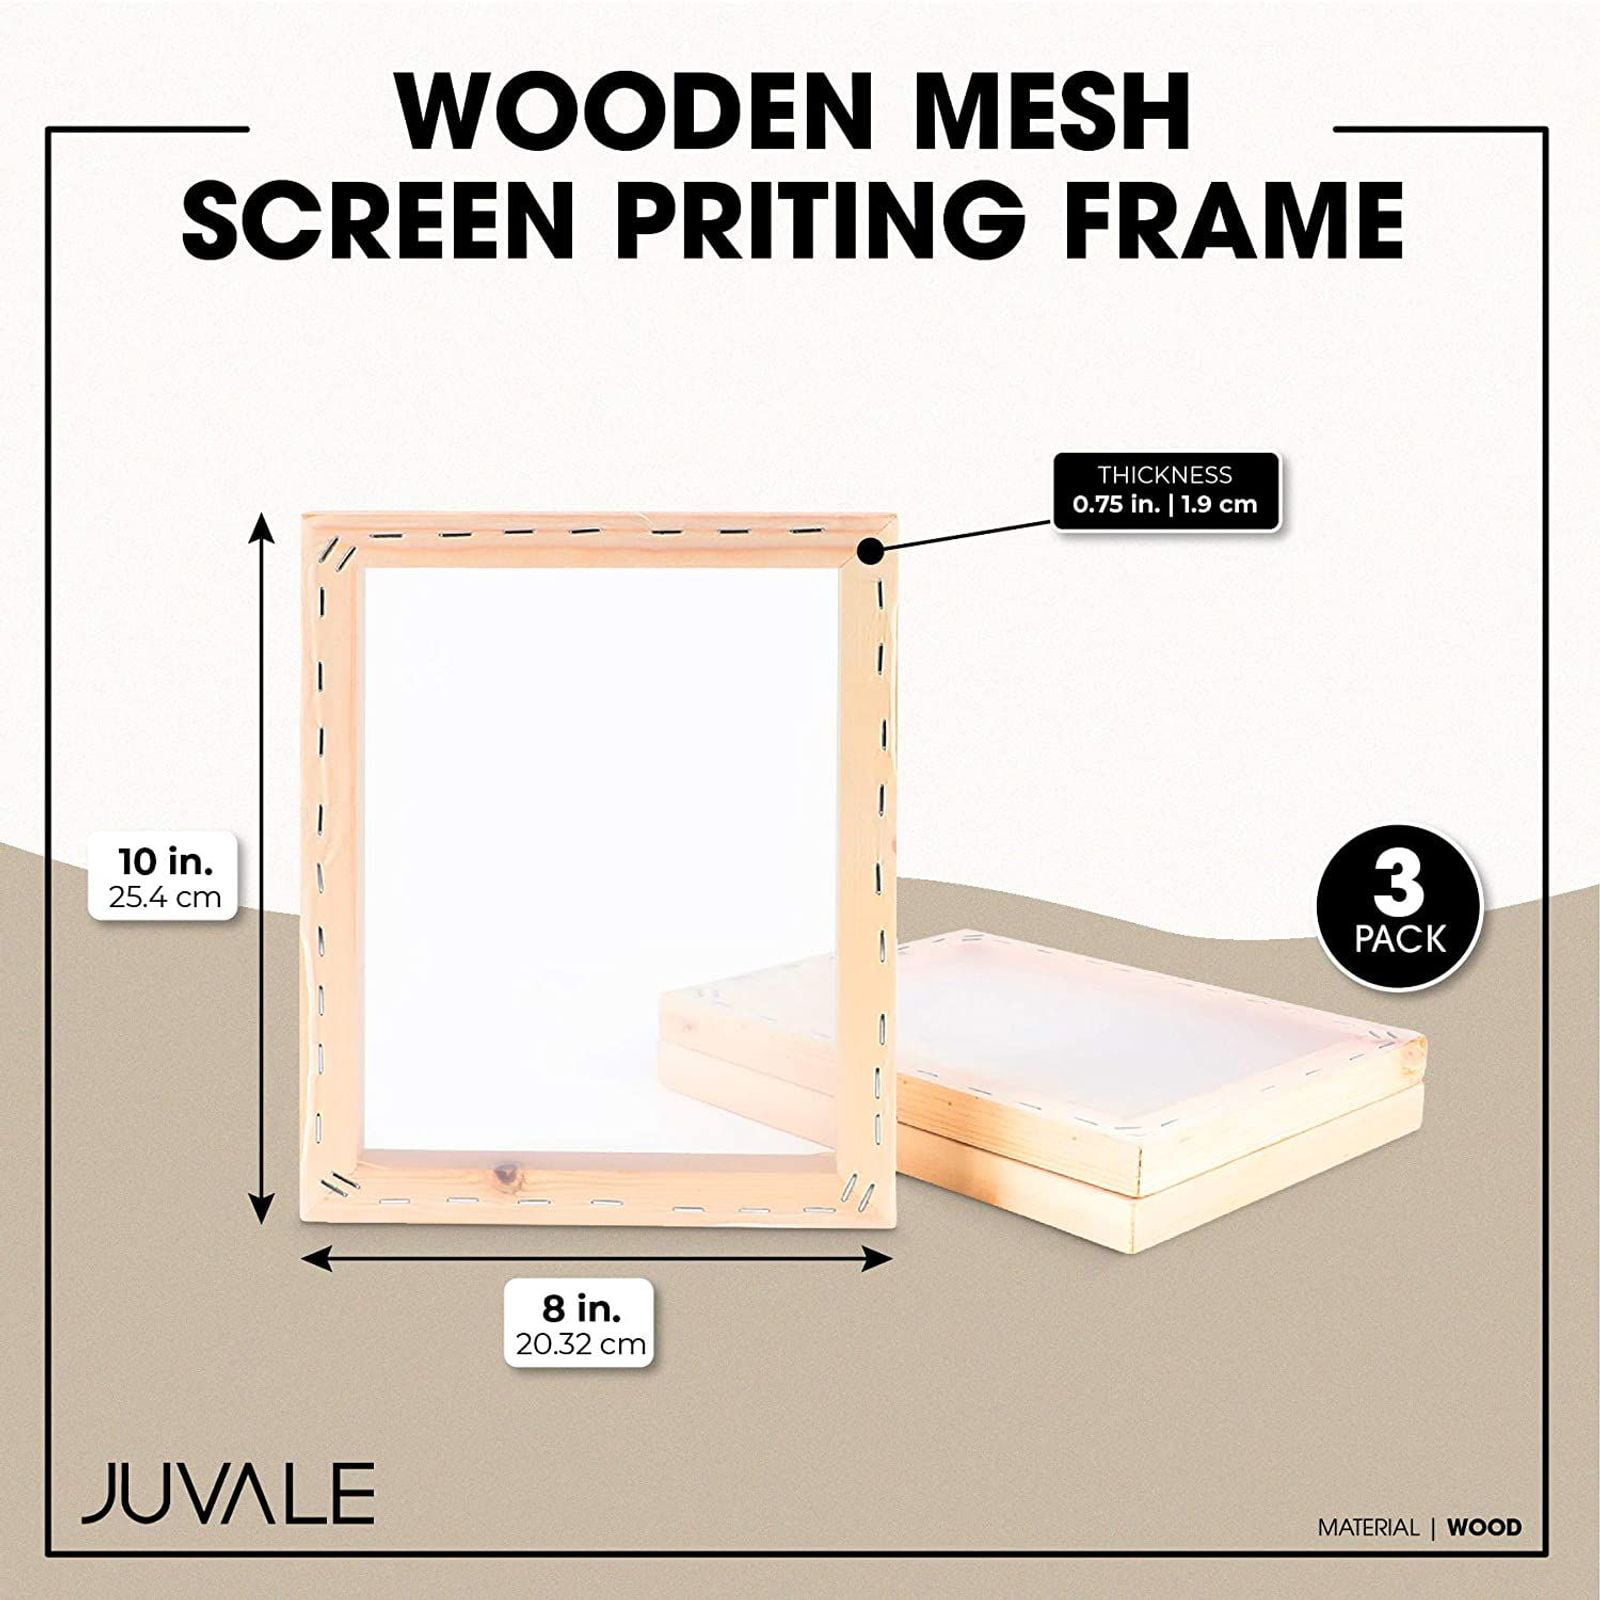 Juvale Natural Wooden Mesh Screen Printing Frame Set, 8 x 10 Inches#43 3 Pack 